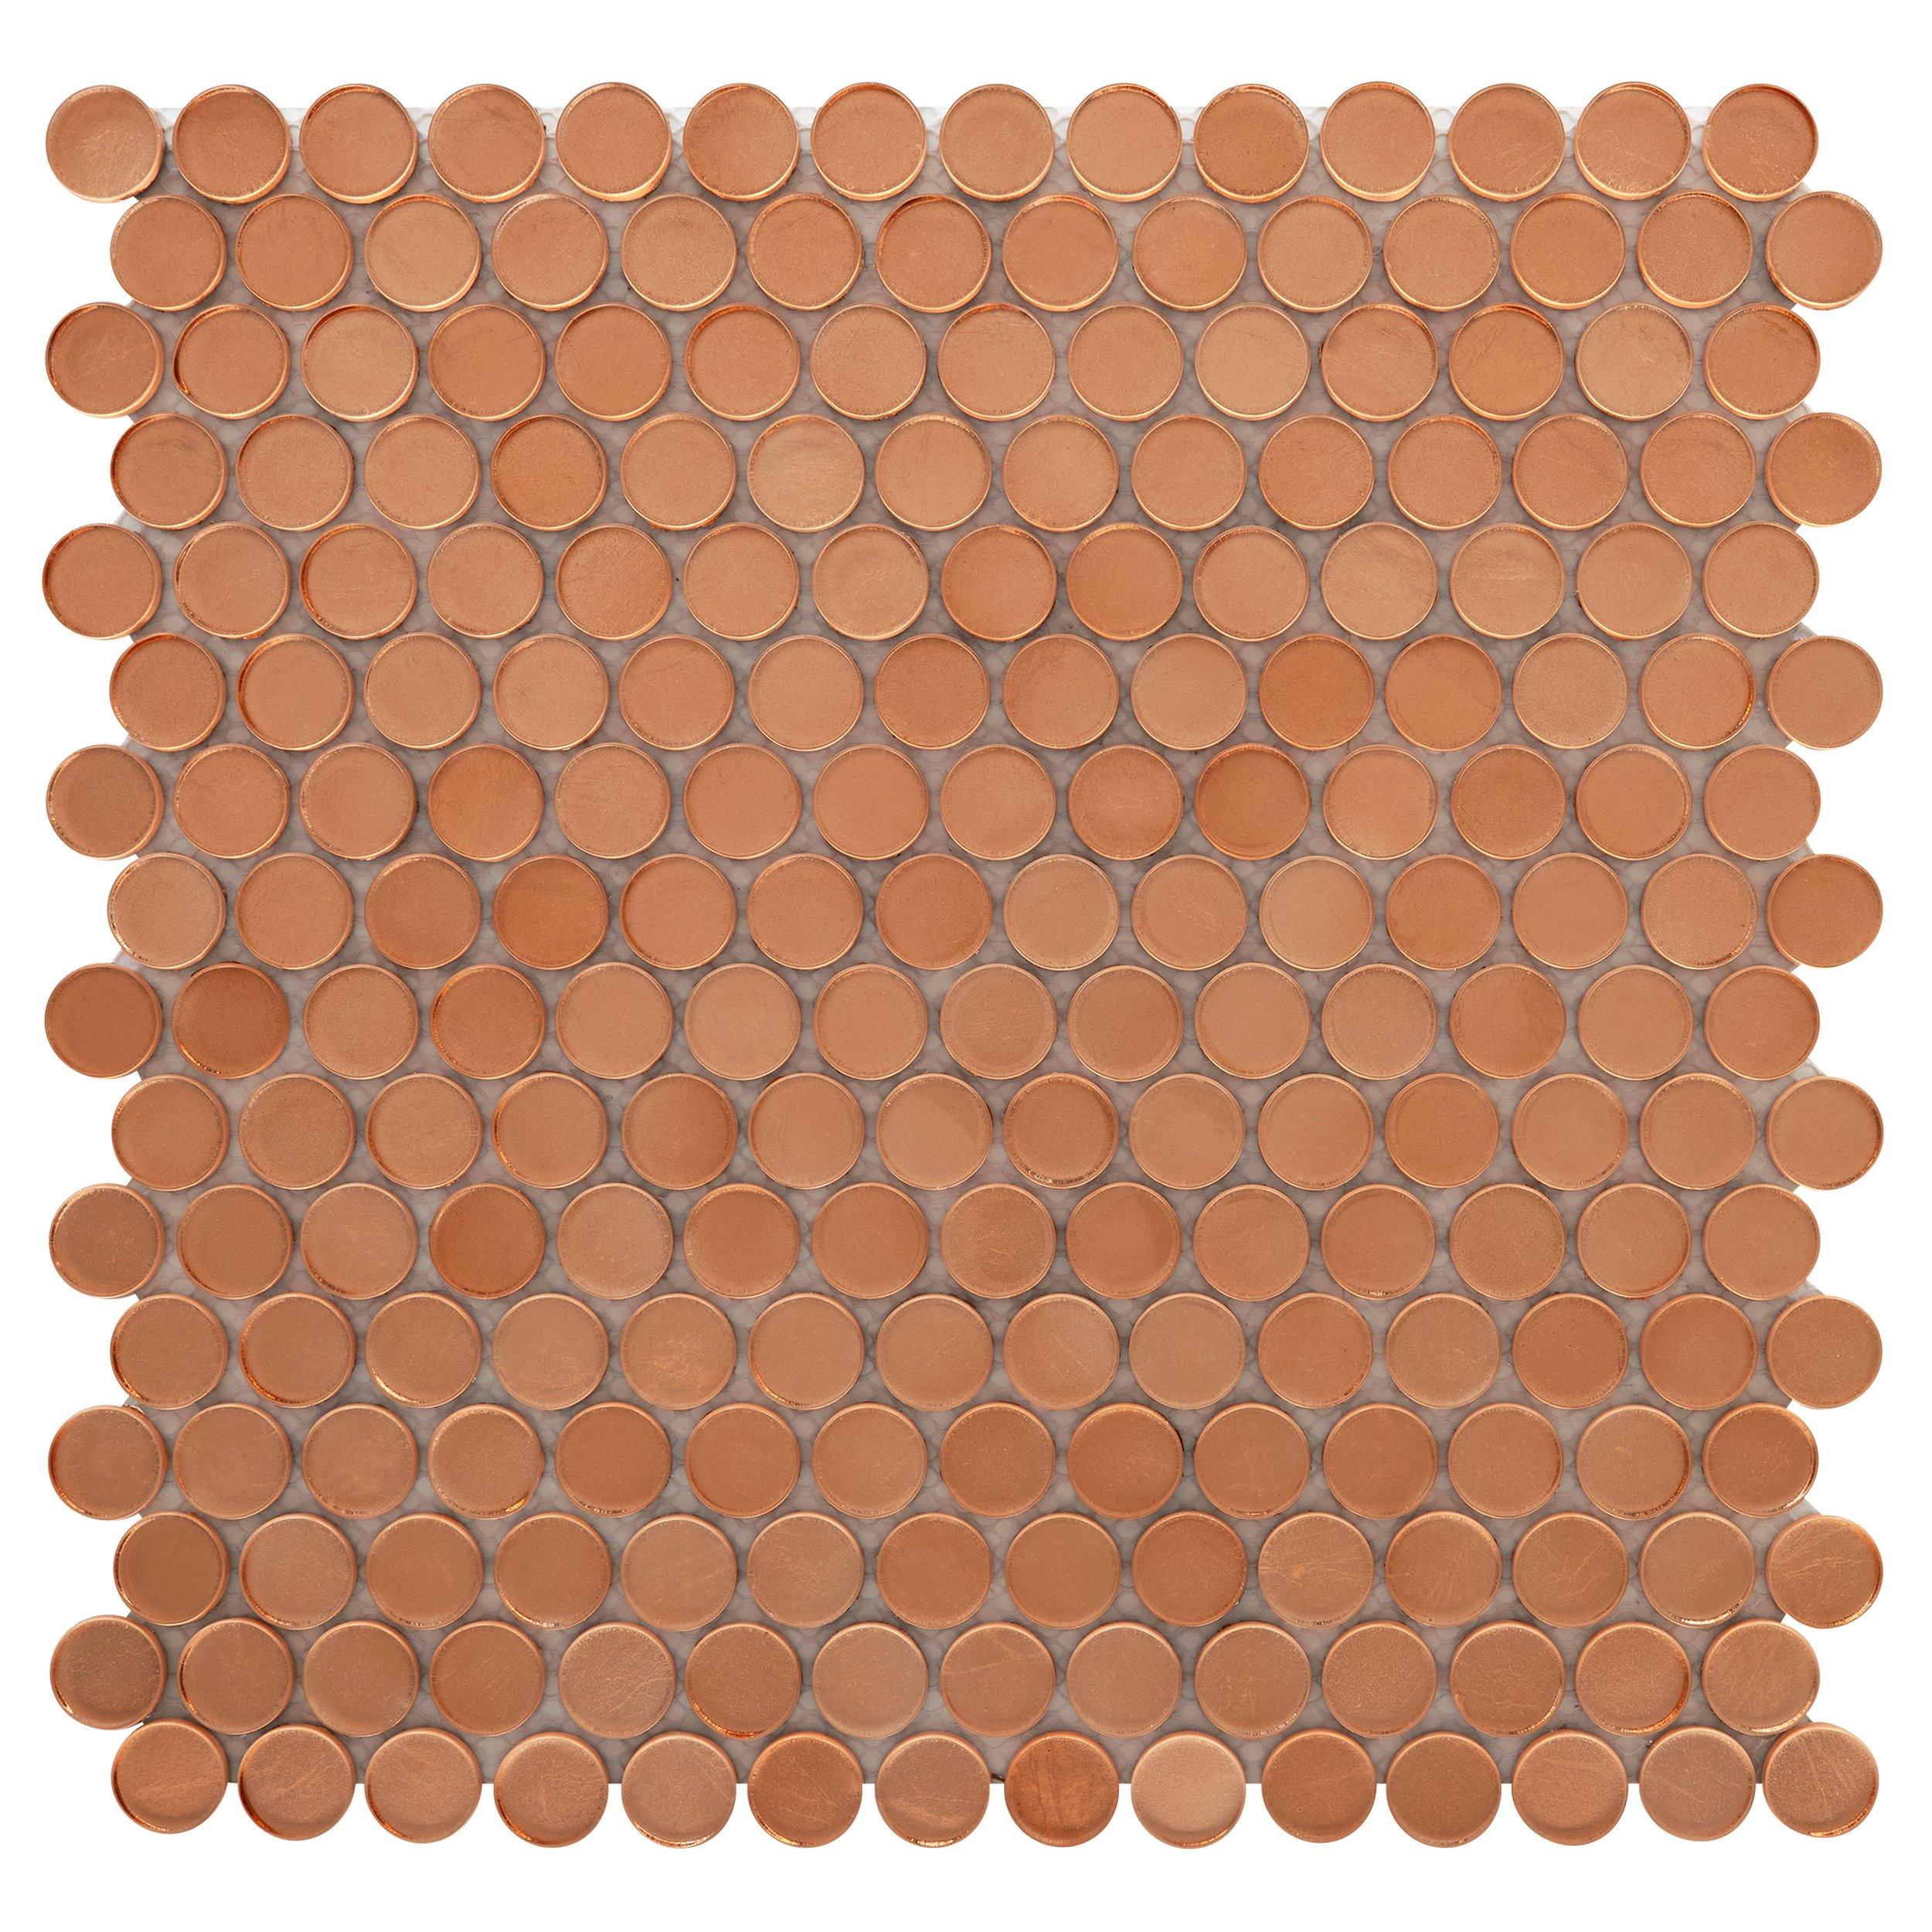 Copper Penny Glass Mosaic